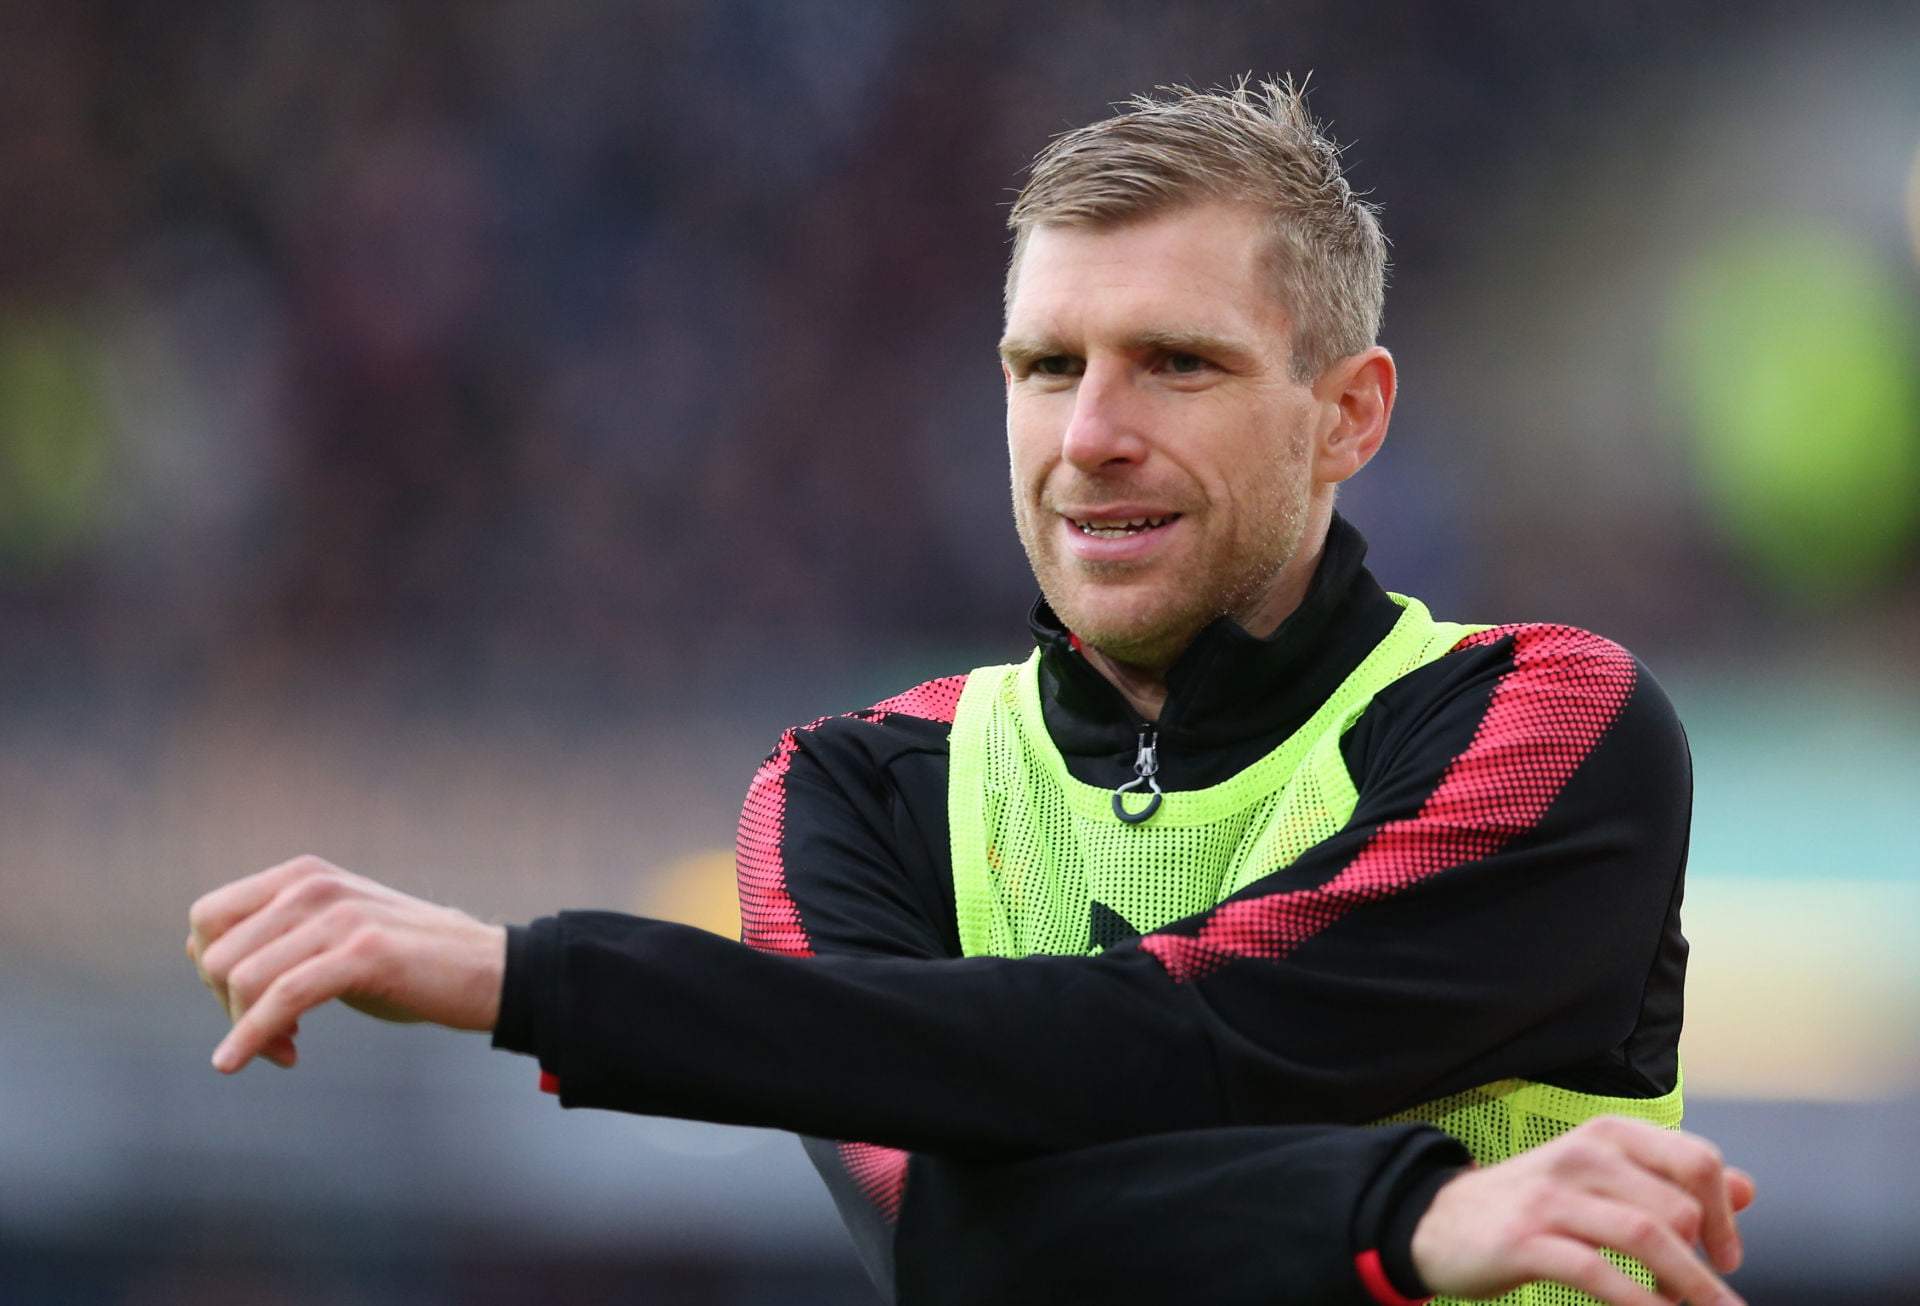 26.11.2017, Turf Moor, Burnley, ENG, Premier League, FC Burnley vs FC Arsenal, 13. Runde, im Bild Per Mertesacker of Arsenal warms up // Per Mertesacker of Arsenal warms up during the English Premier League 13th round match between FC Burnley and FC Arsenal at the Turf Moor in Burnley, Great Britain on 2017/11/26. EXPA Pictures © 2017, PhotoCredit: EXPA/ Focus Images/ Simon Moore *****ATTENTION - for AUT, GER, FRA, ITA, SUI, POL, CRO, SLO only***** LIGA ANGIELSKA SEZON 2017/2018 PILKA NOZNA FOT. EXPA/NEWSPIX.PL POLAND ONLY !!! --- Newspix.pl *** Local Caption *** www.newspix.pl mail us: info@newspix.pl call us: 0048 022 23 22 222 --- Polish Picture Agency by Ringier Axel Springer Poland